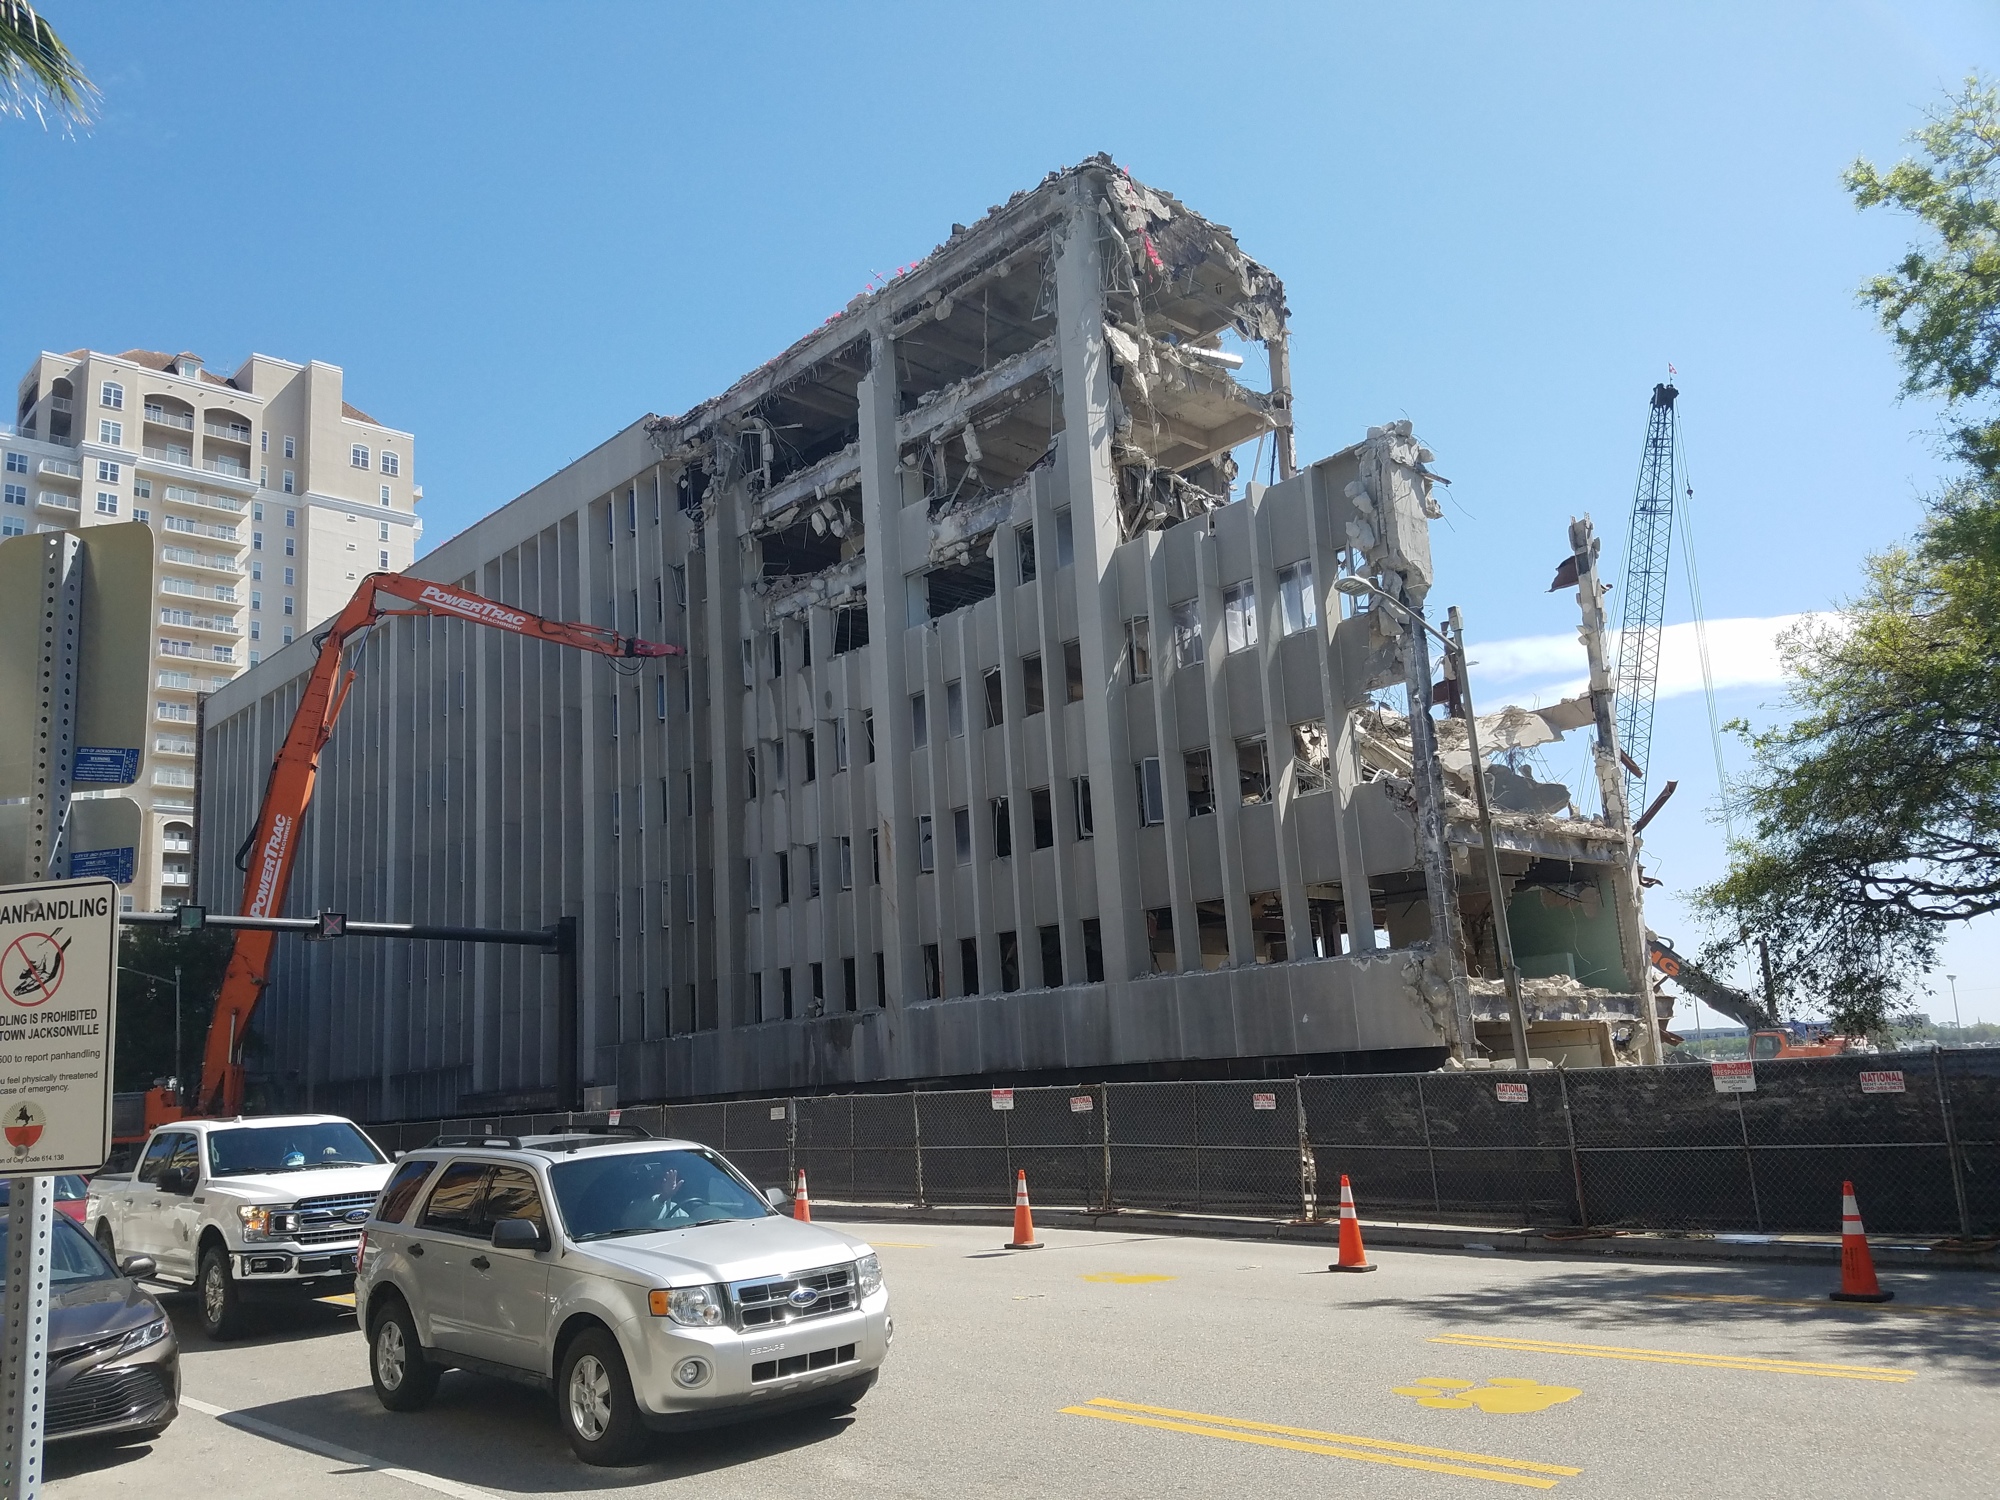 Workers continue to demolish the front of the old Duval County Courthouse along East Bay Street on Wednesday.